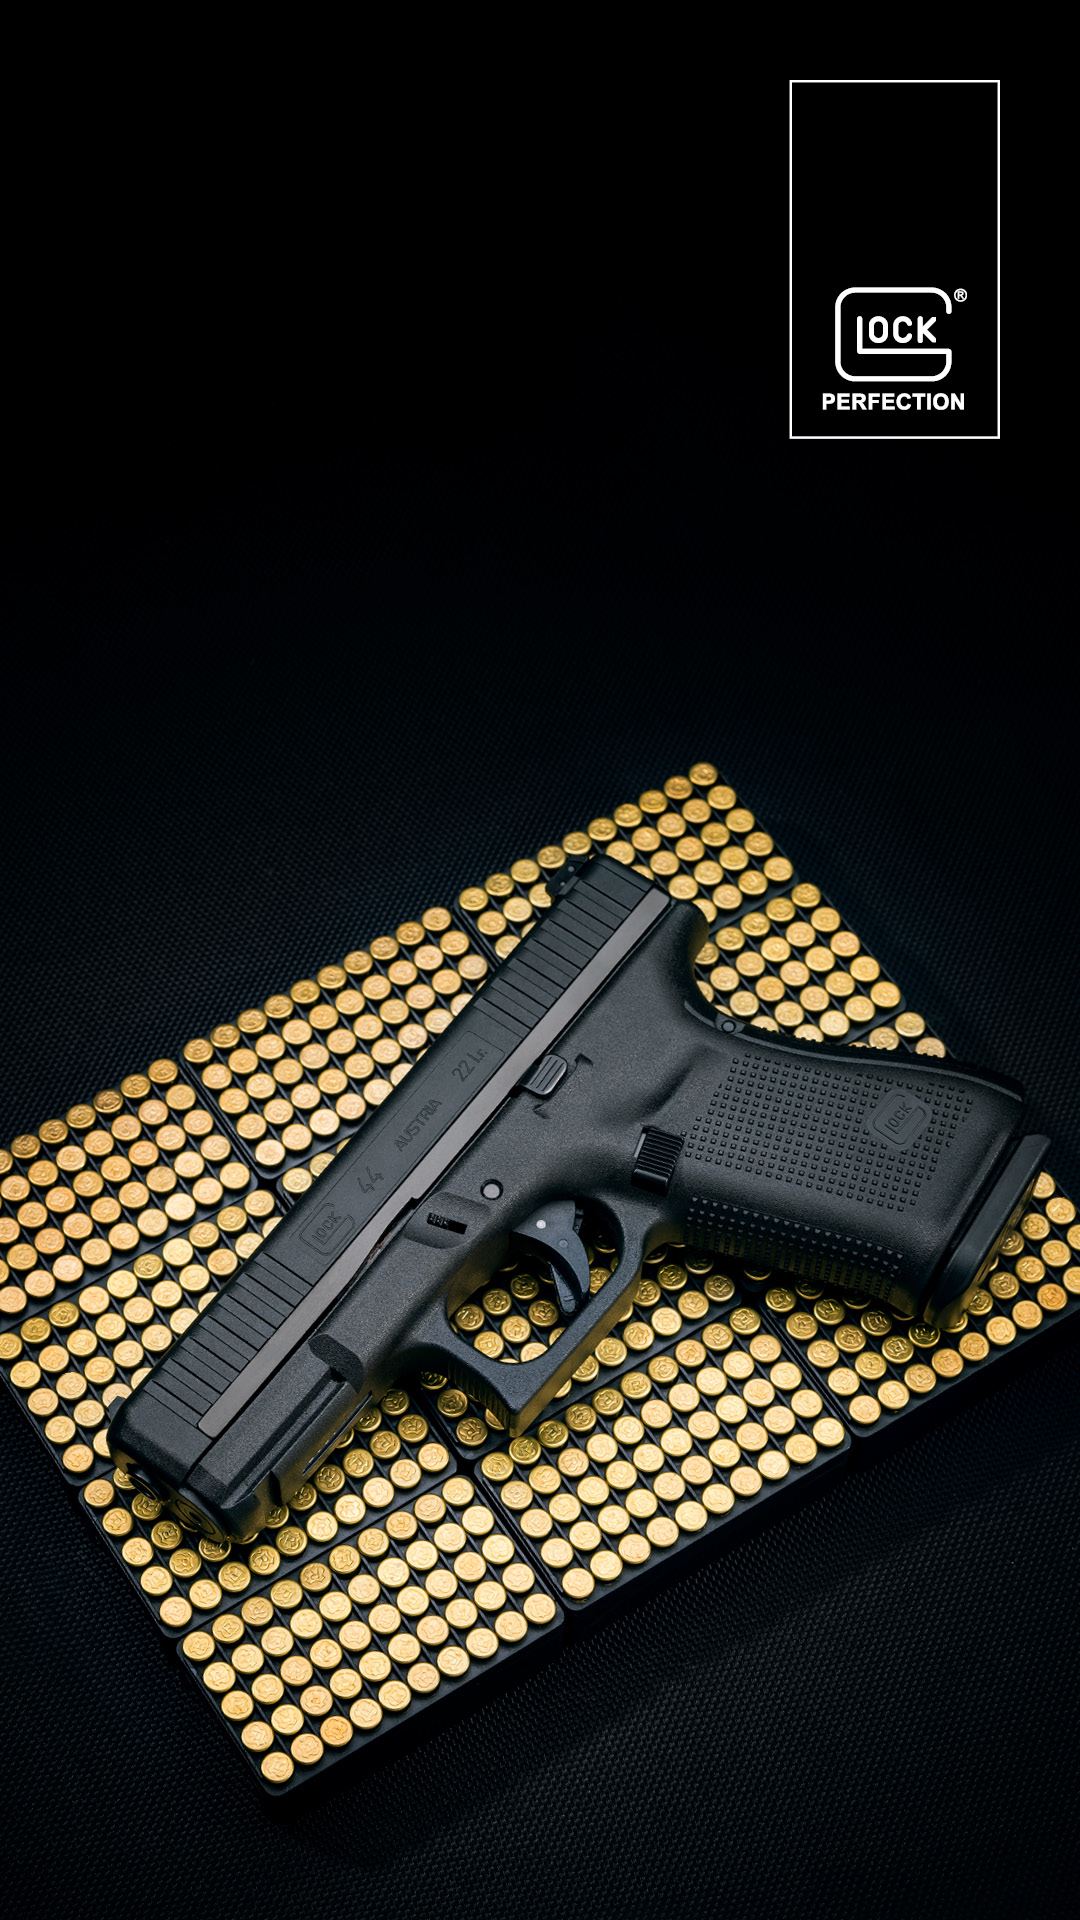 Glock Perfection Download Area